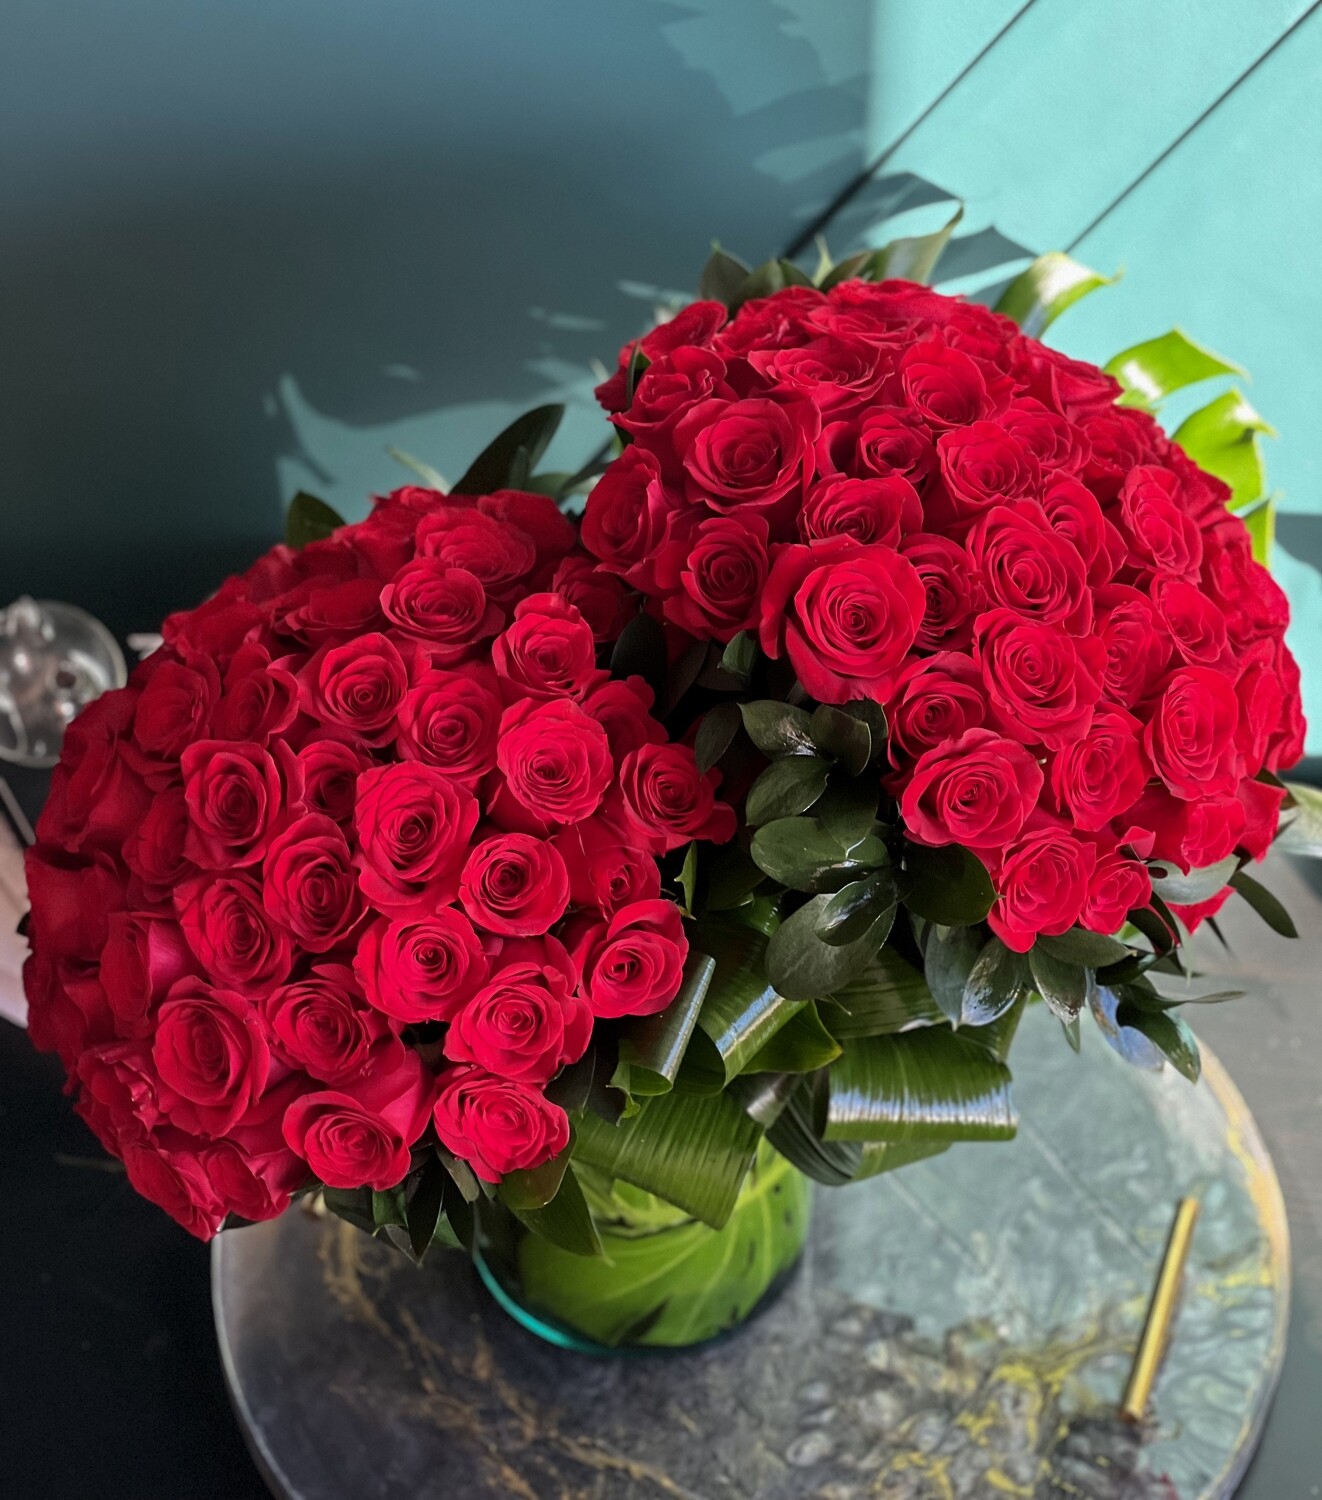 100 RED ROSES ARRANGEMENT IN A CLEAR VASE